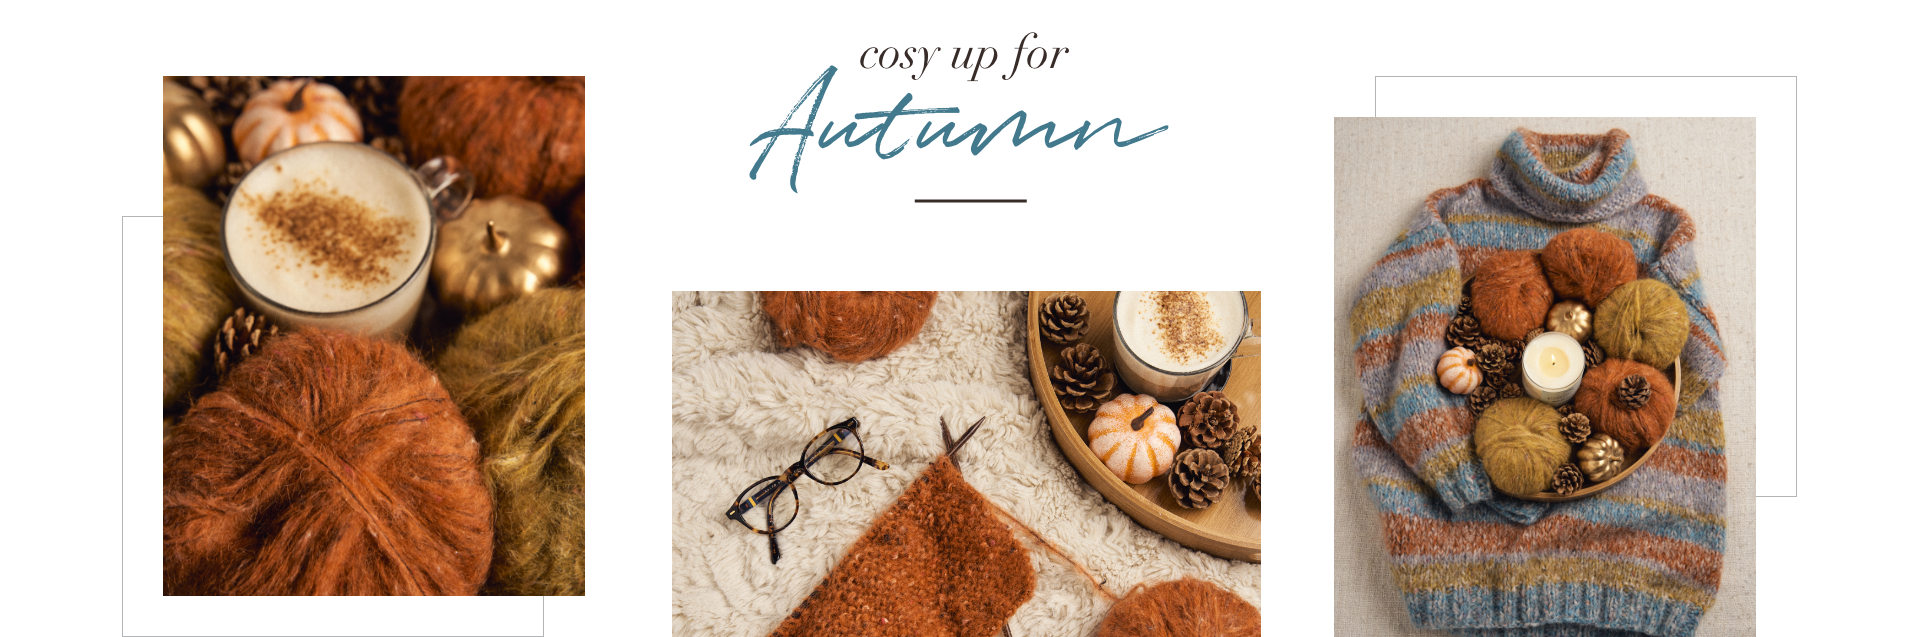 Campaign Cosy up or Autumn Banner